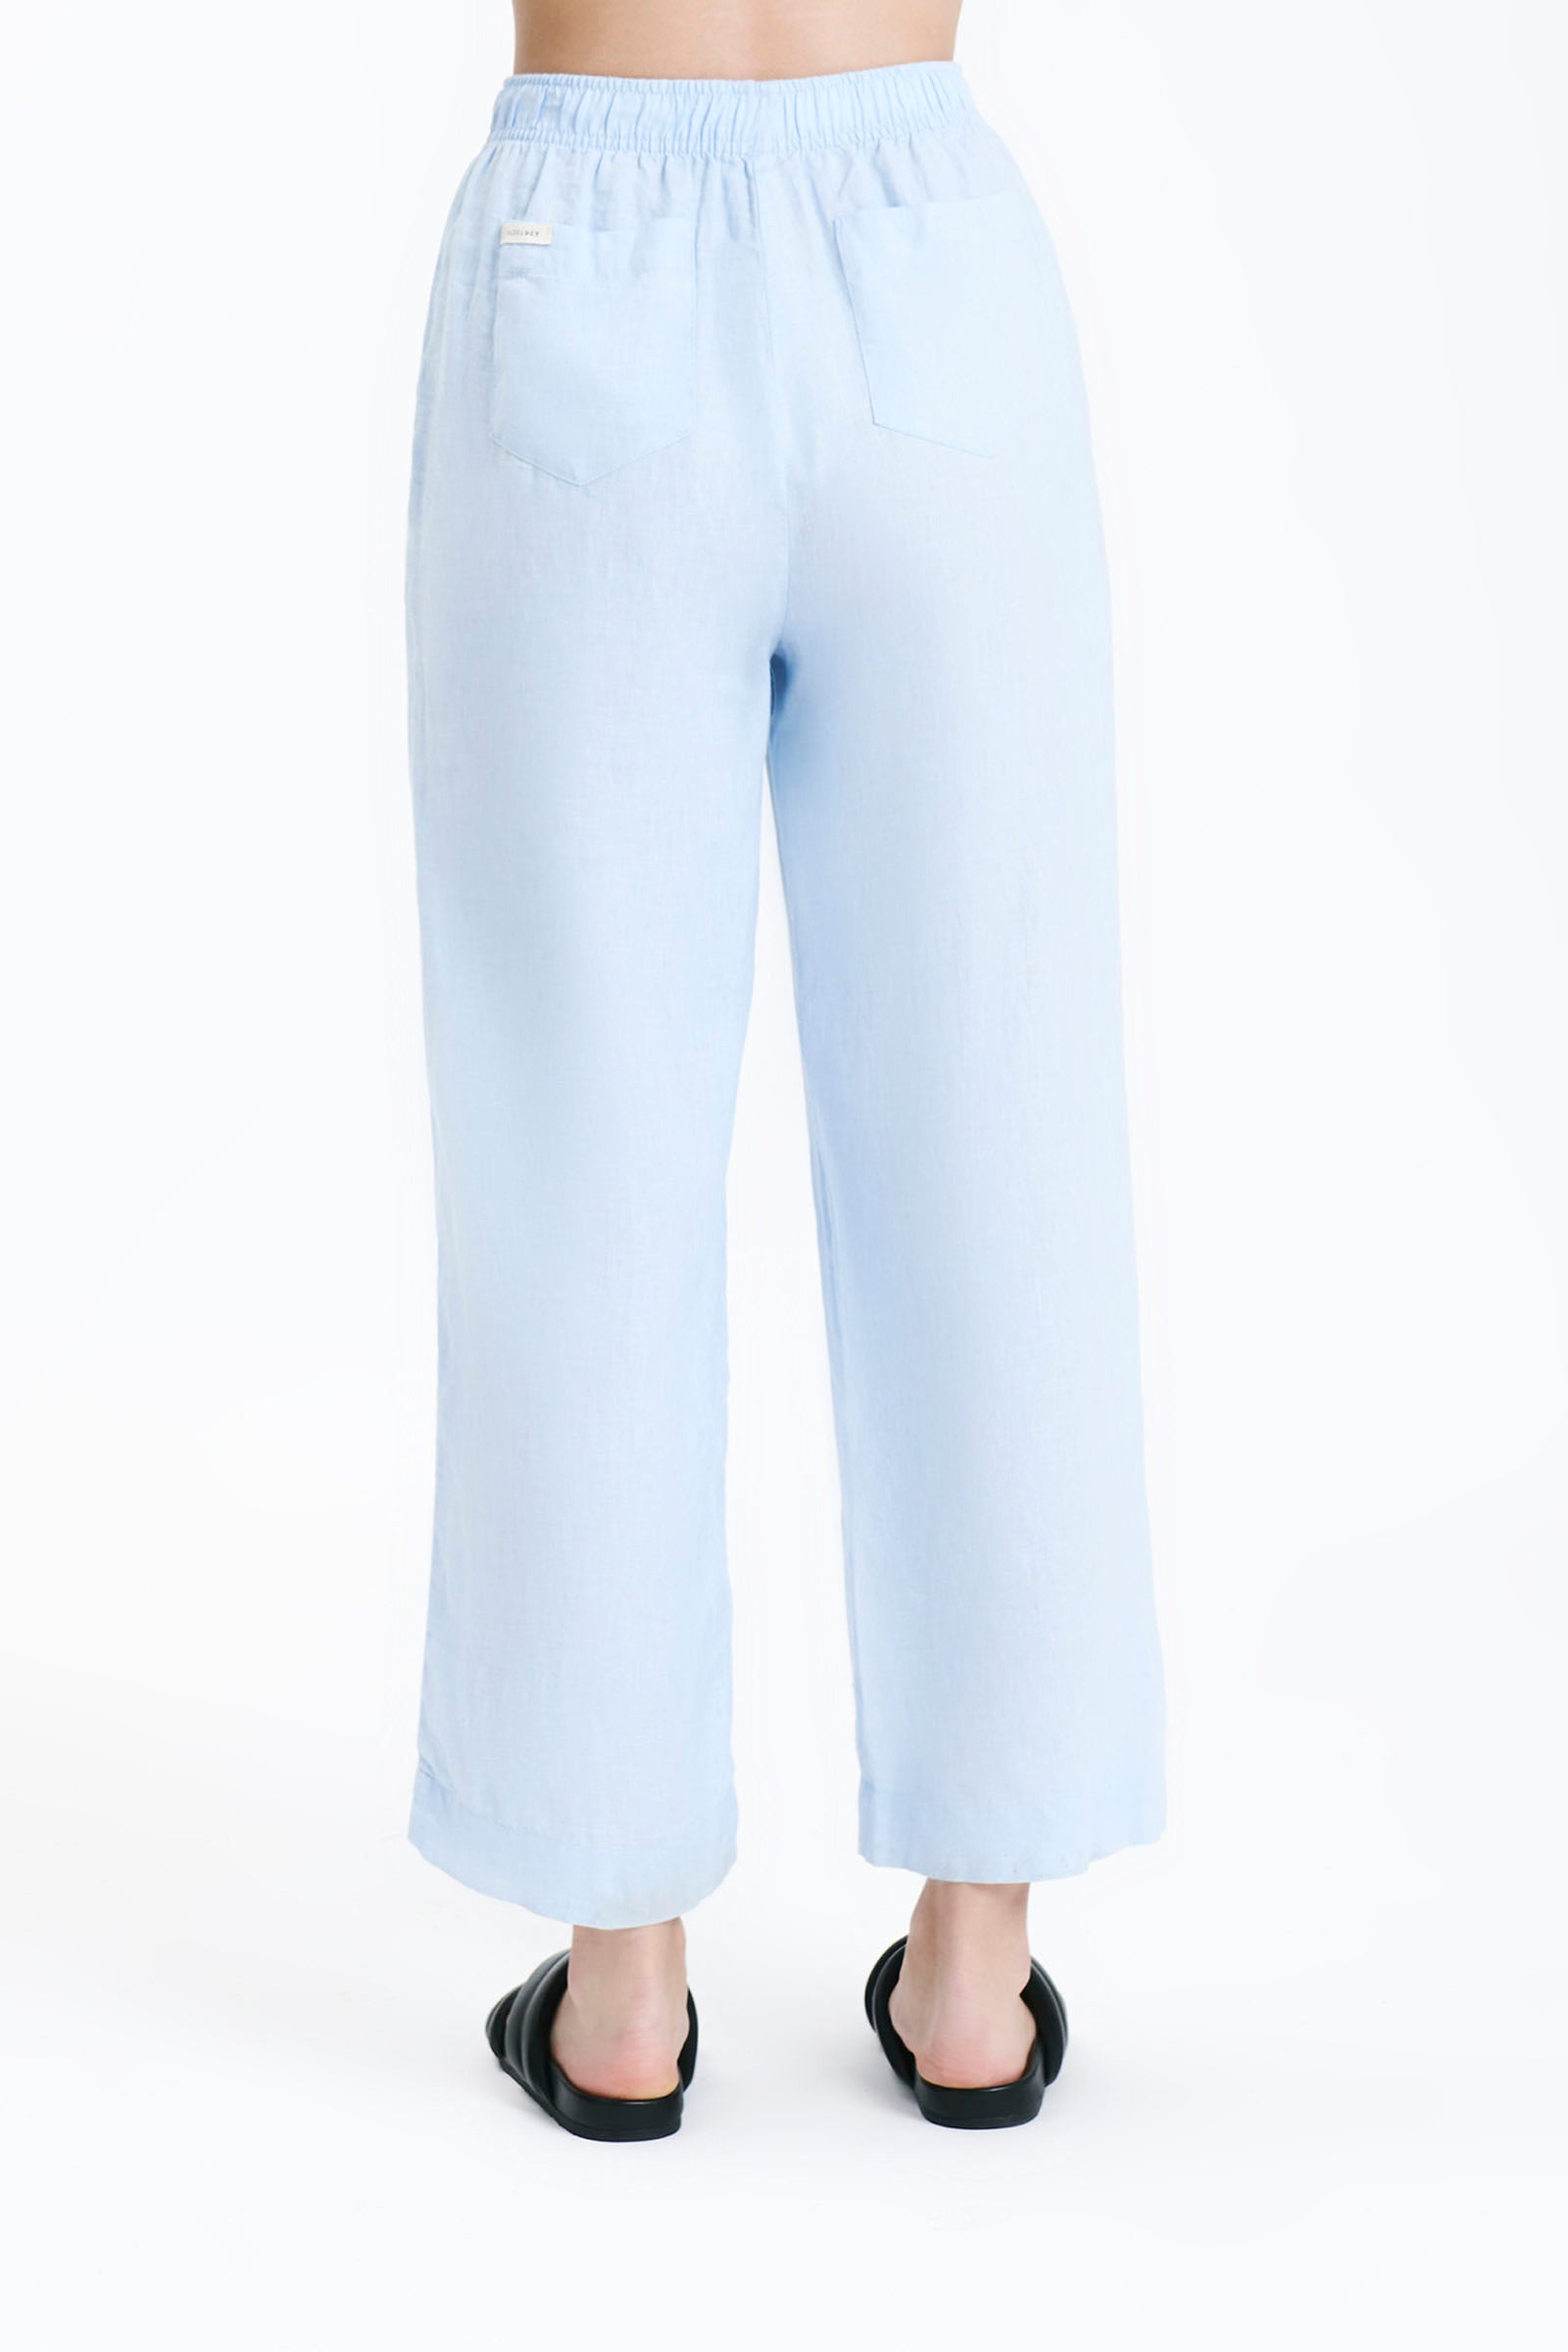 Nude Lucy Lounge Linen Crop Pant in a Blue Sky Colour